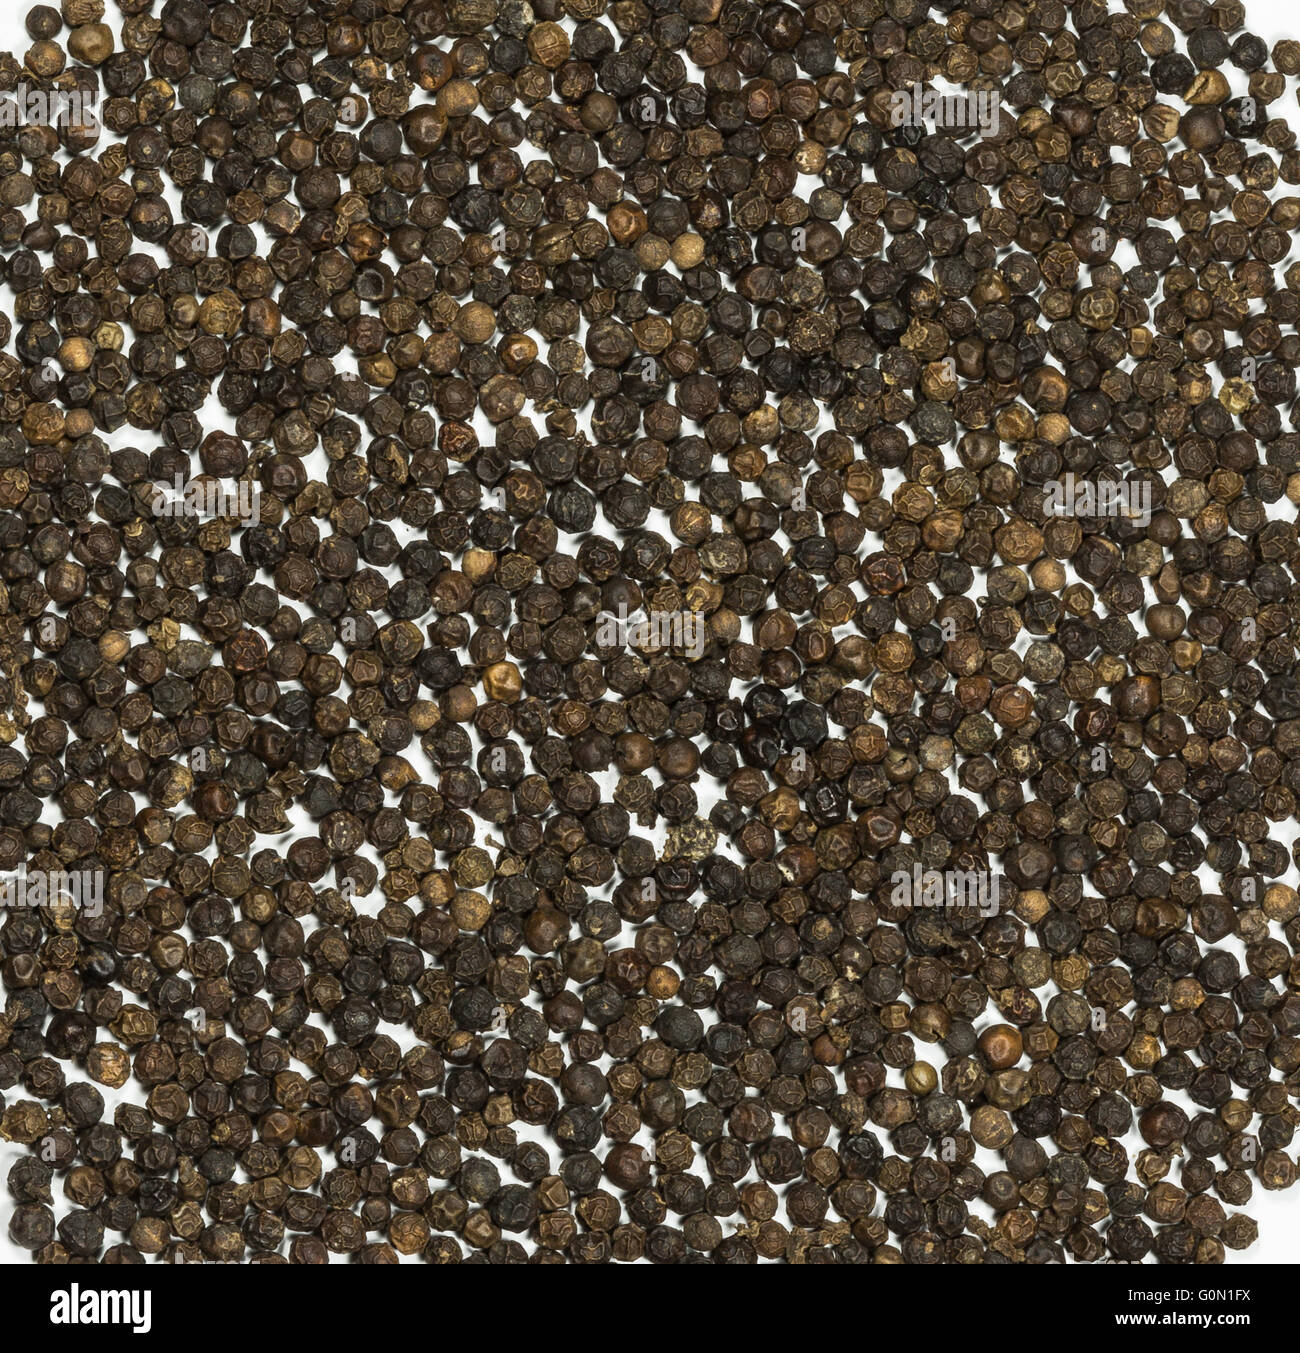 A lot of black pepper seeds Stock Photo